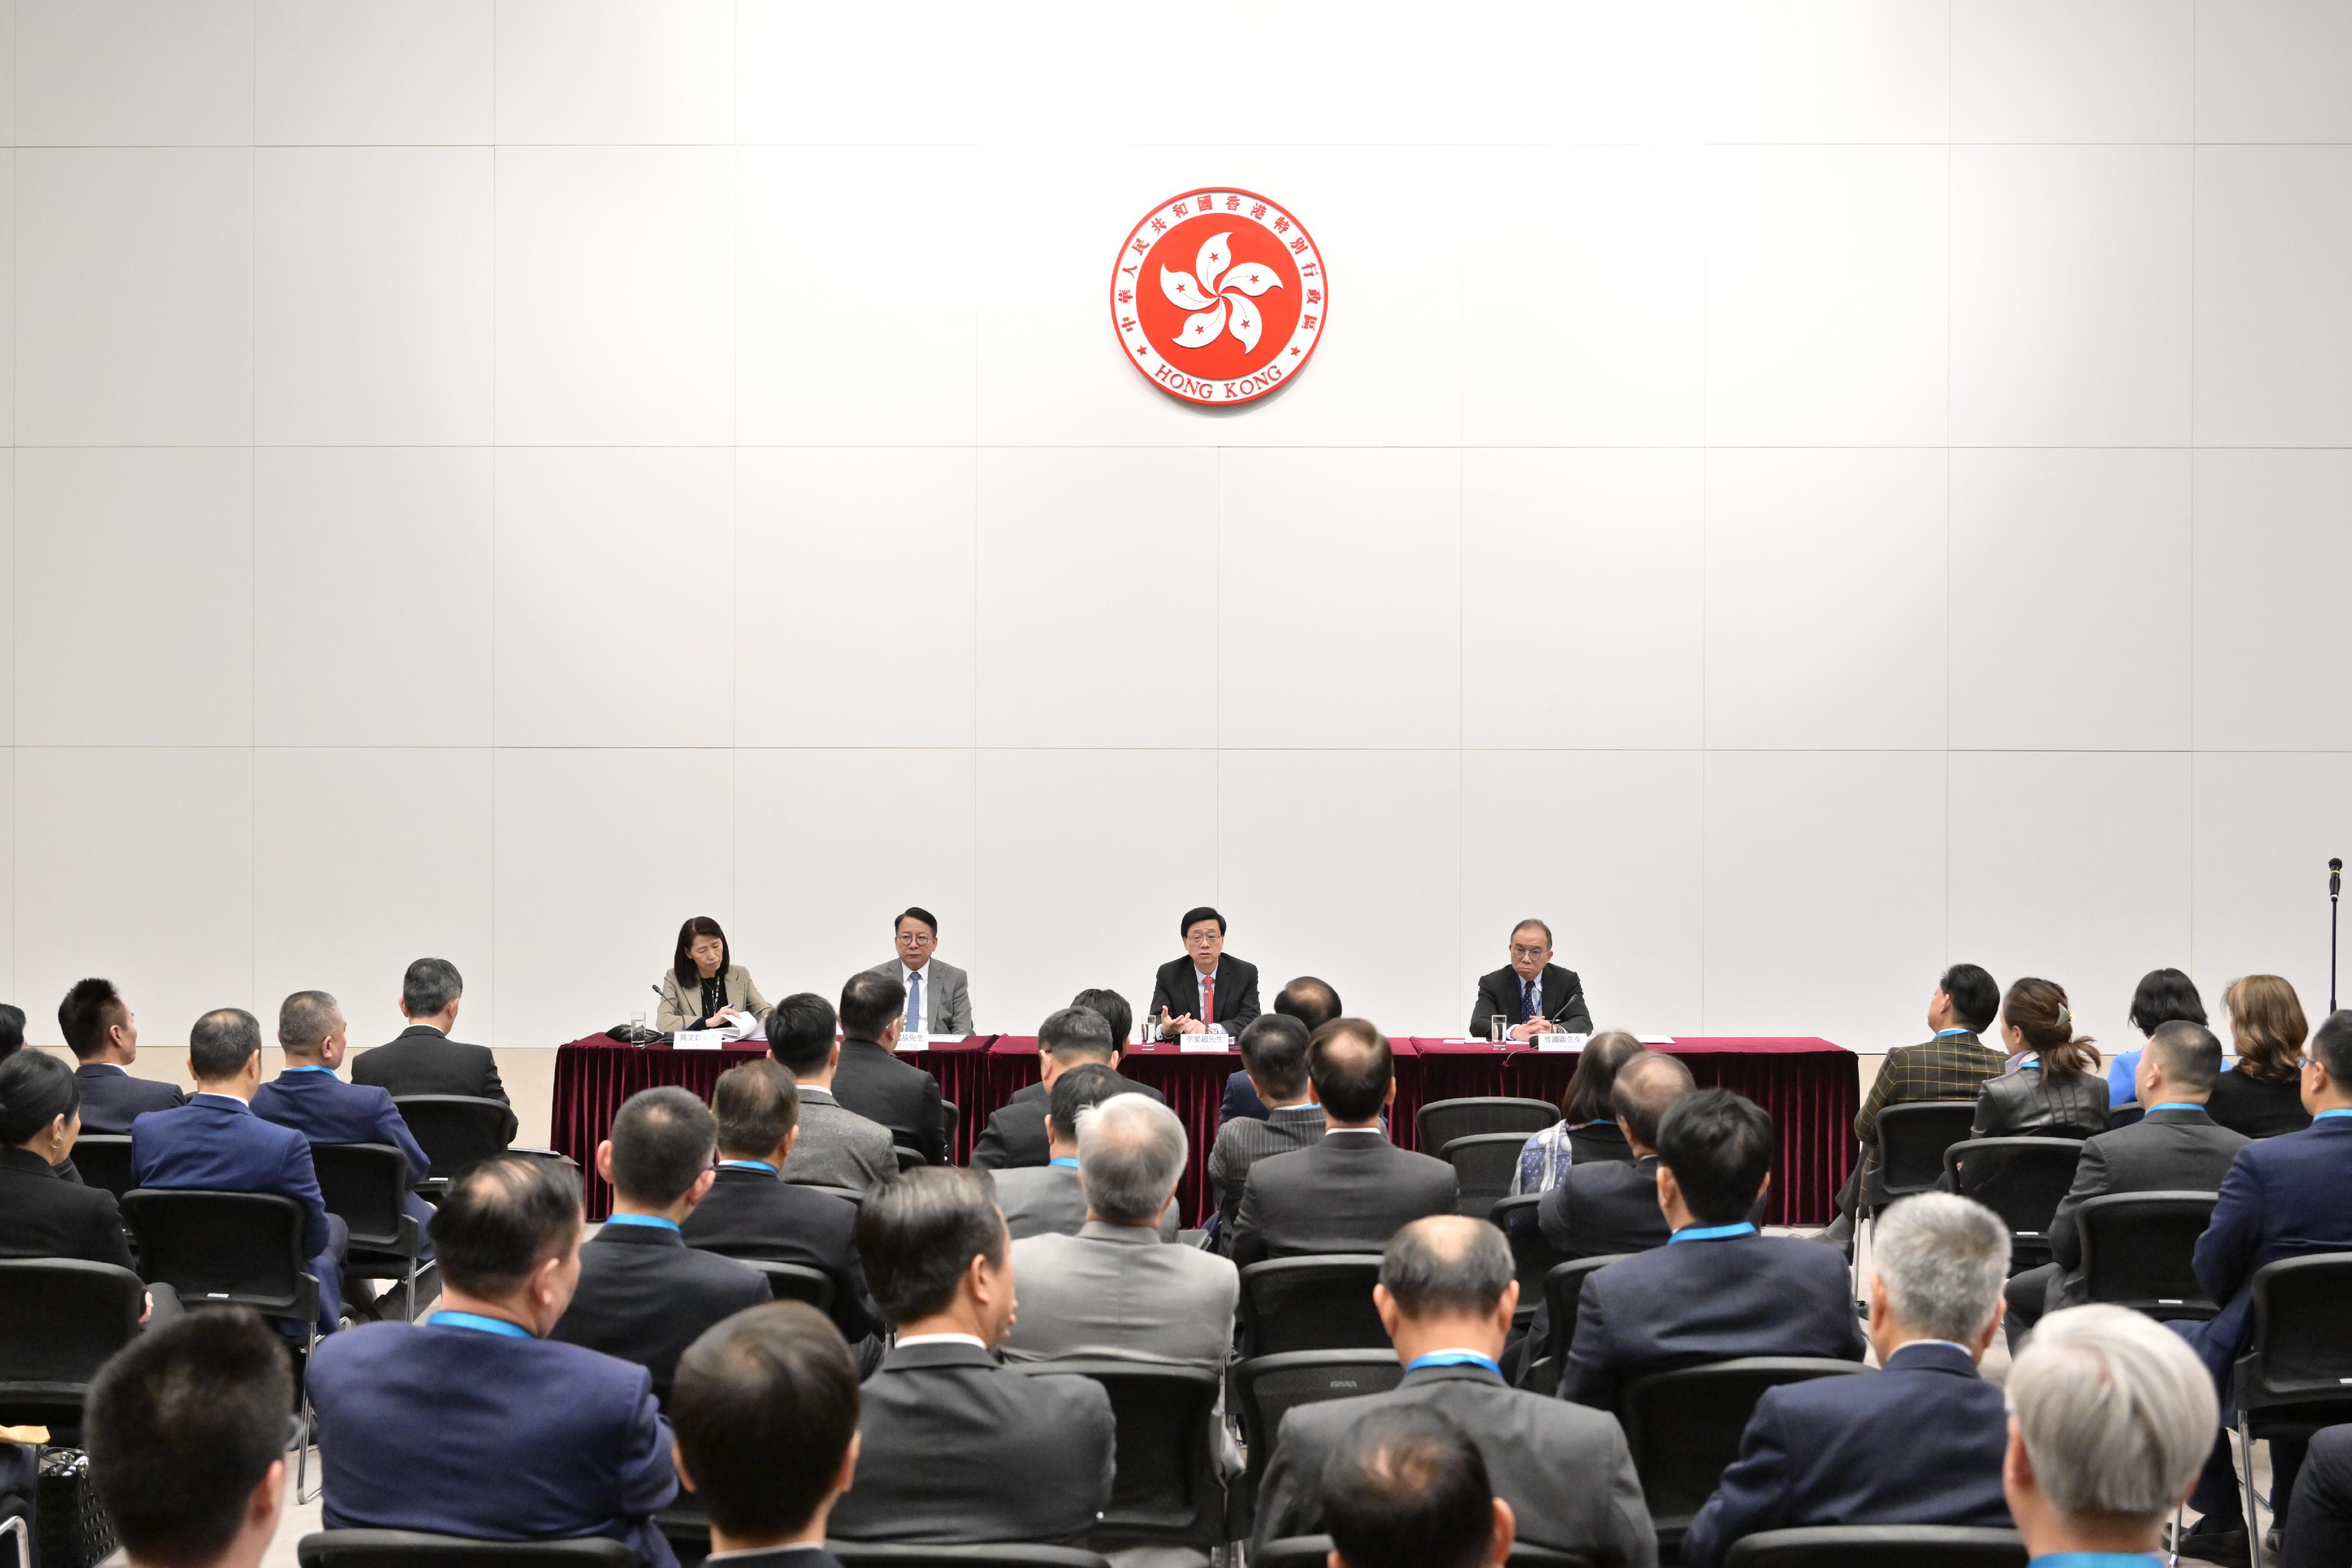 The Chief Executive, Mr John Lee (second right), held an engagement session with over 100 Hong Kong members of the National Committee of the Chinese People's Political Consultative Conference today (March 1).